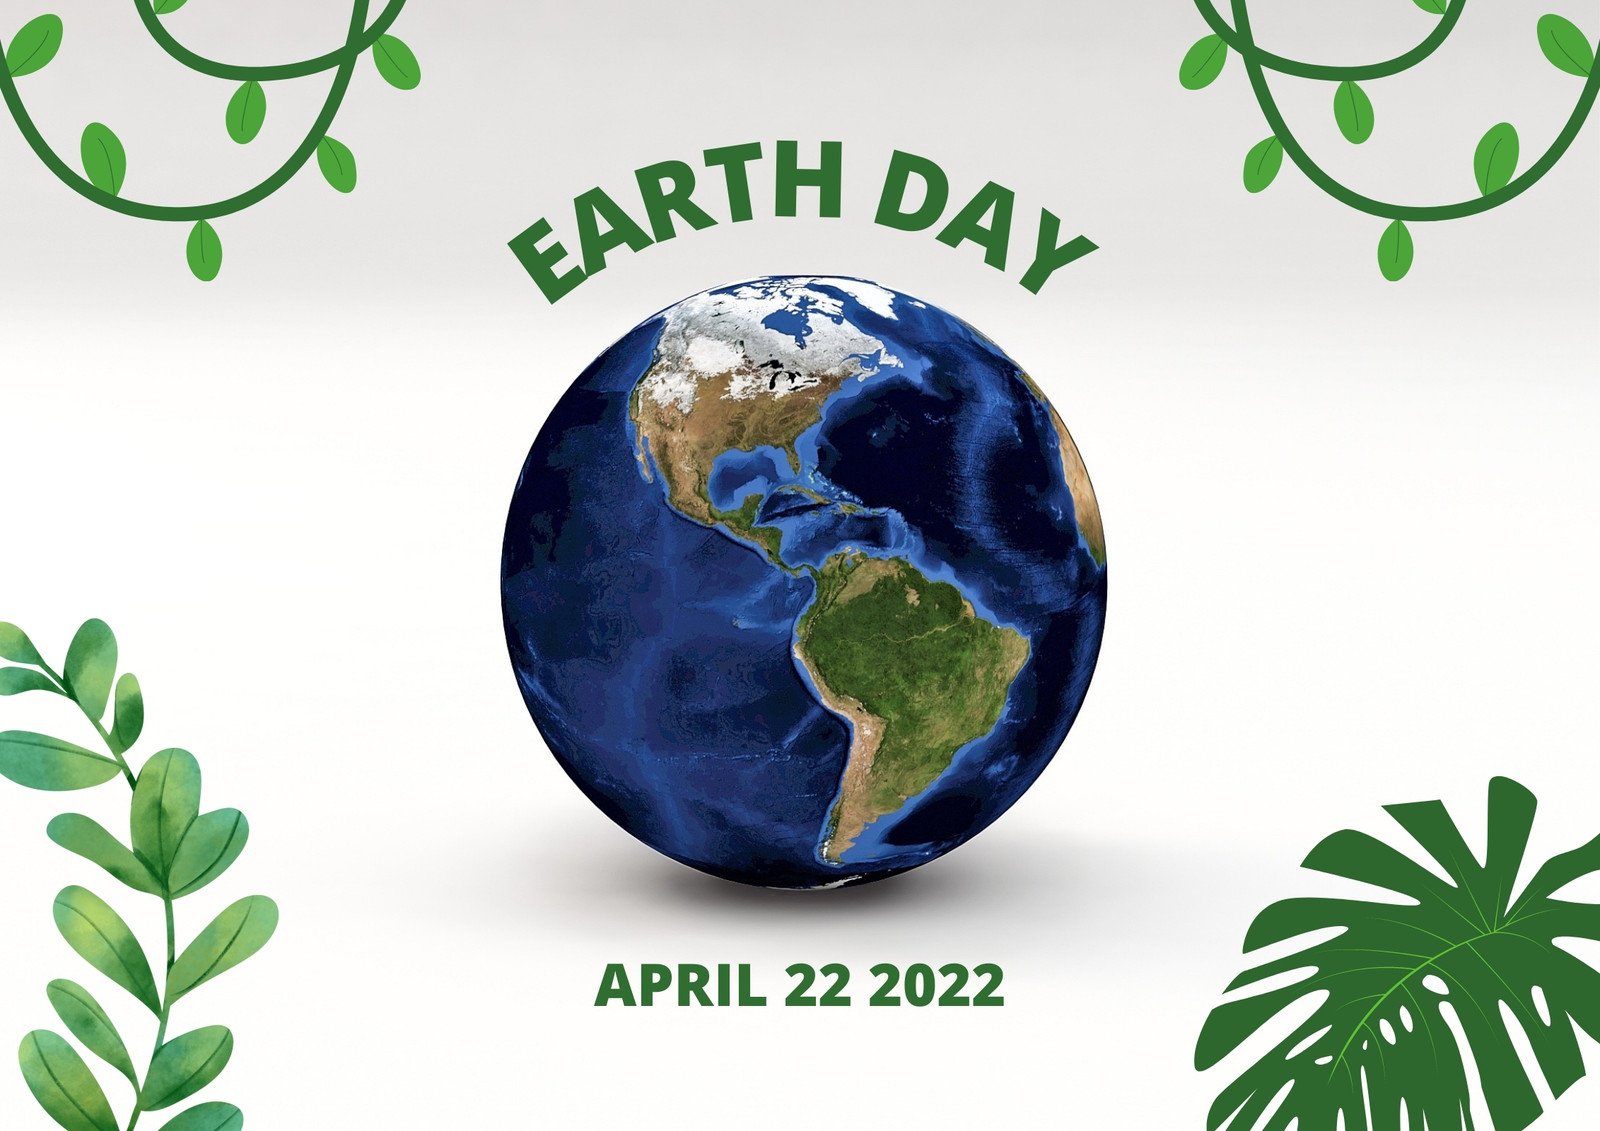 earth day flyer 2022